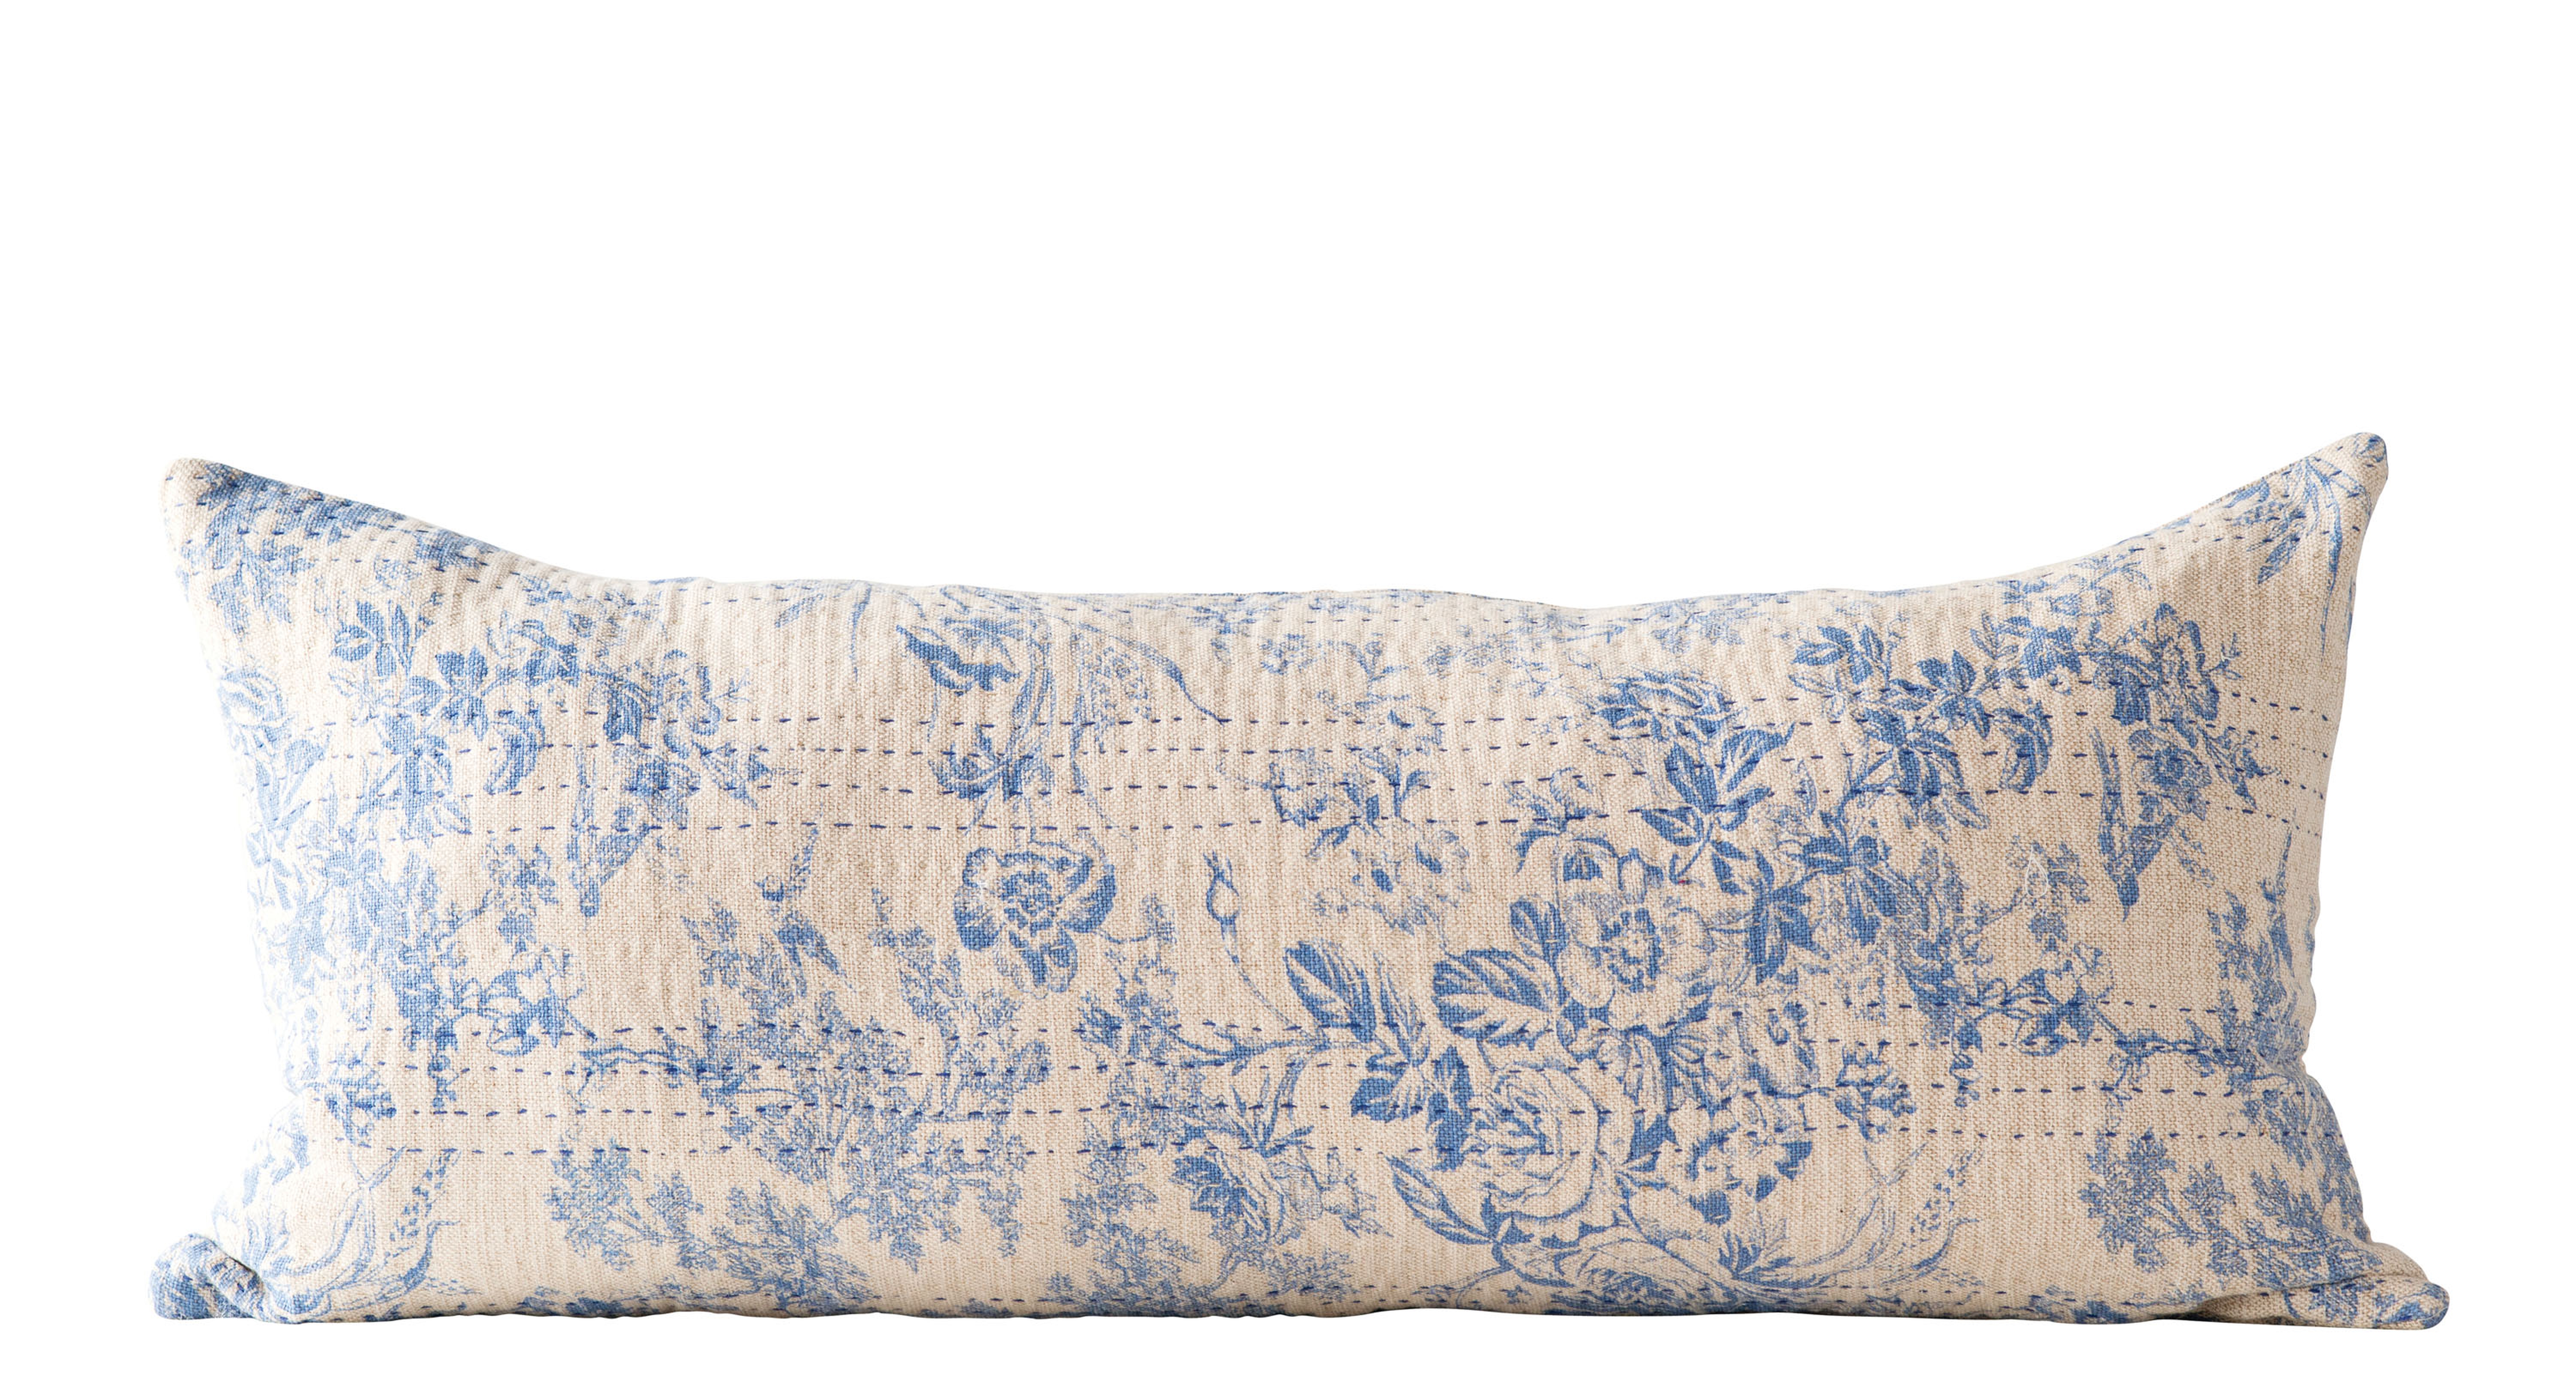 Blue Rectangle Cotton Chambray Pillow with Toile Pattern & Kantha Stitch - Nomad Home